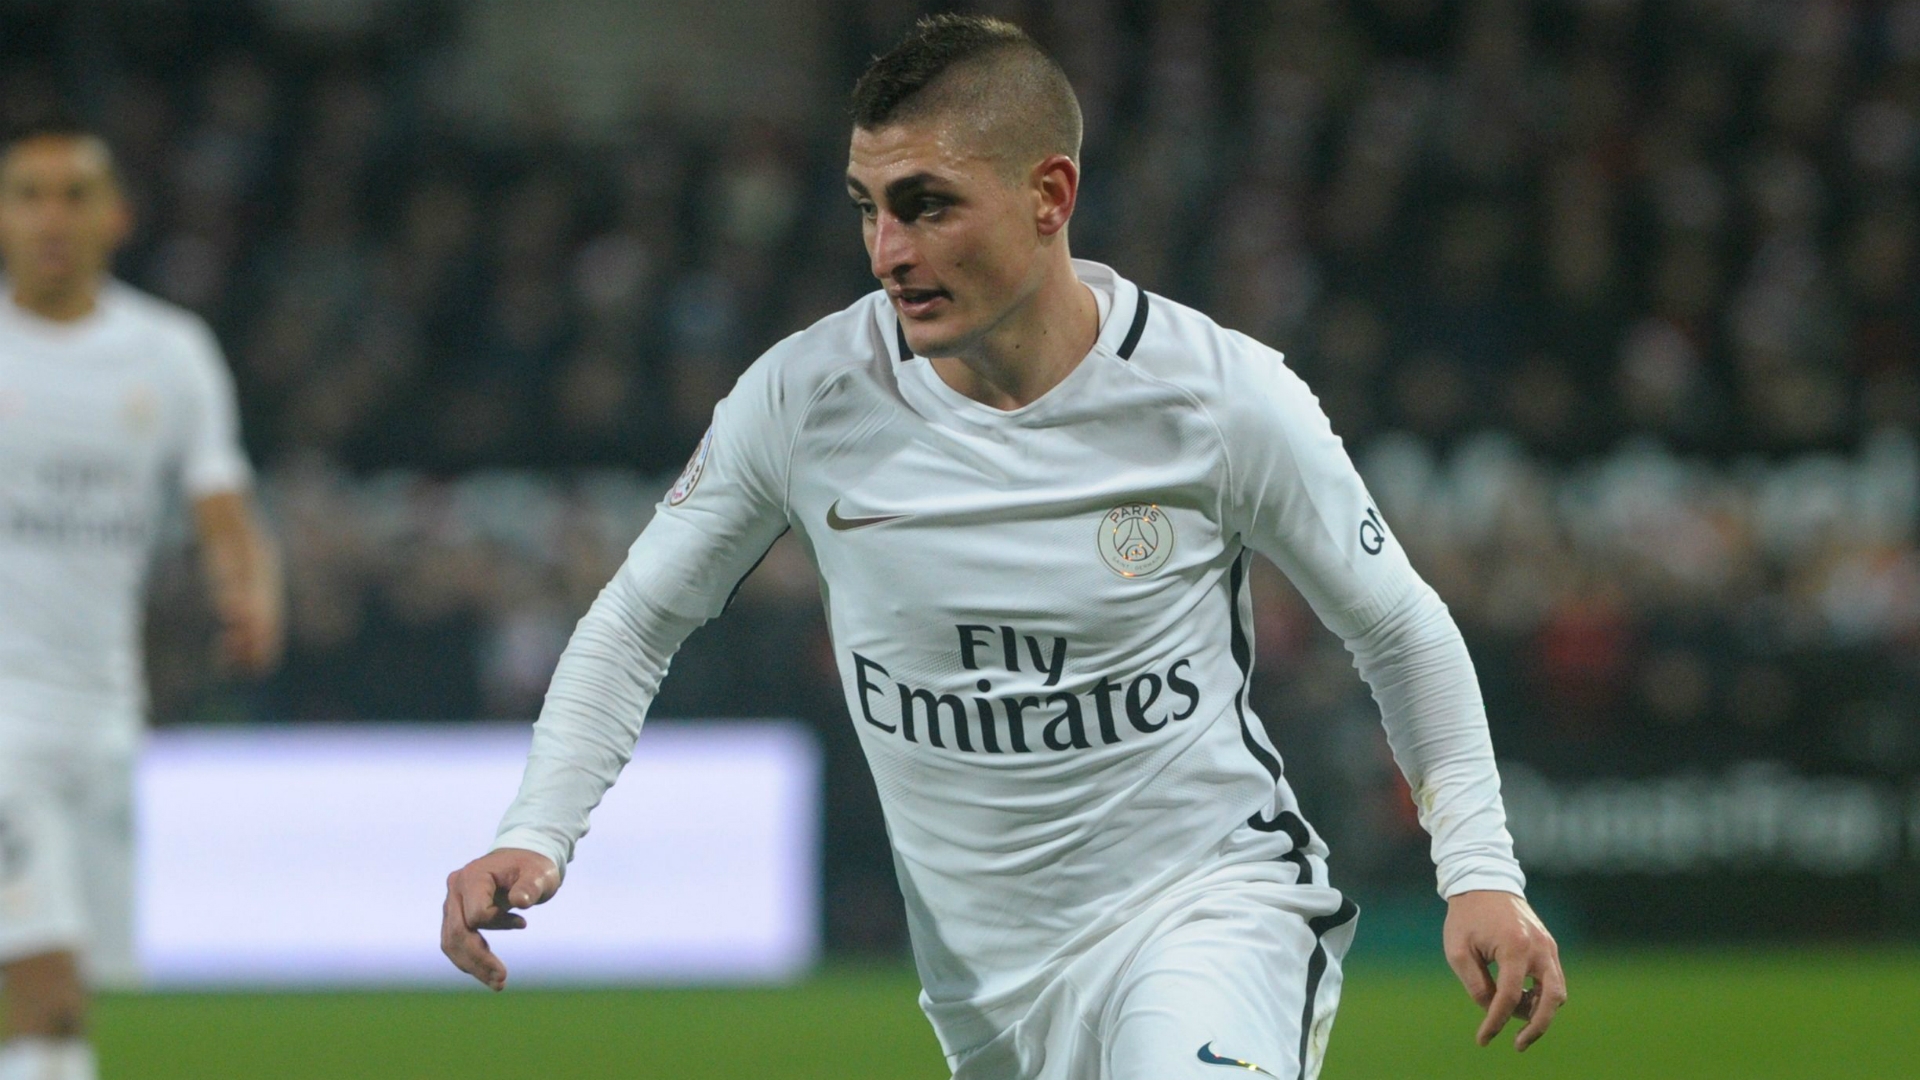 Players and representatives of PSG have said that the club is focusing much of their energy on having Verratti stay.